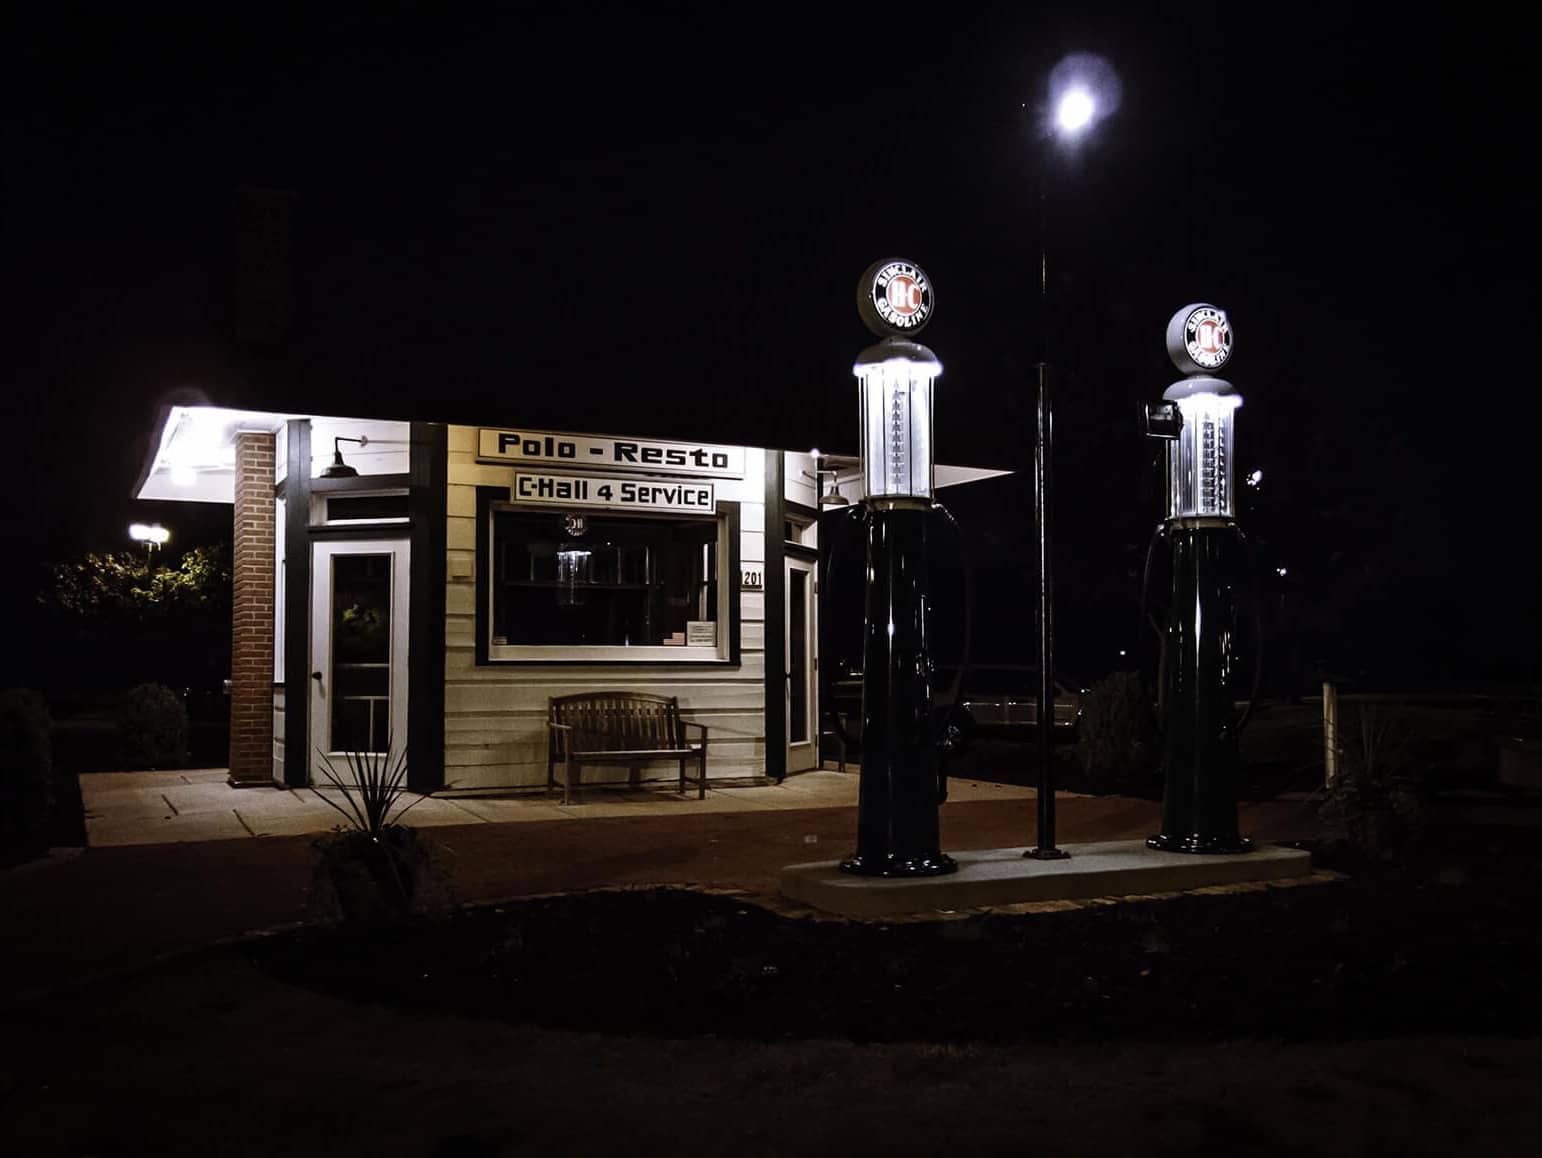 Service station night shot at Voyageur Park in De Pere, Wisconsin